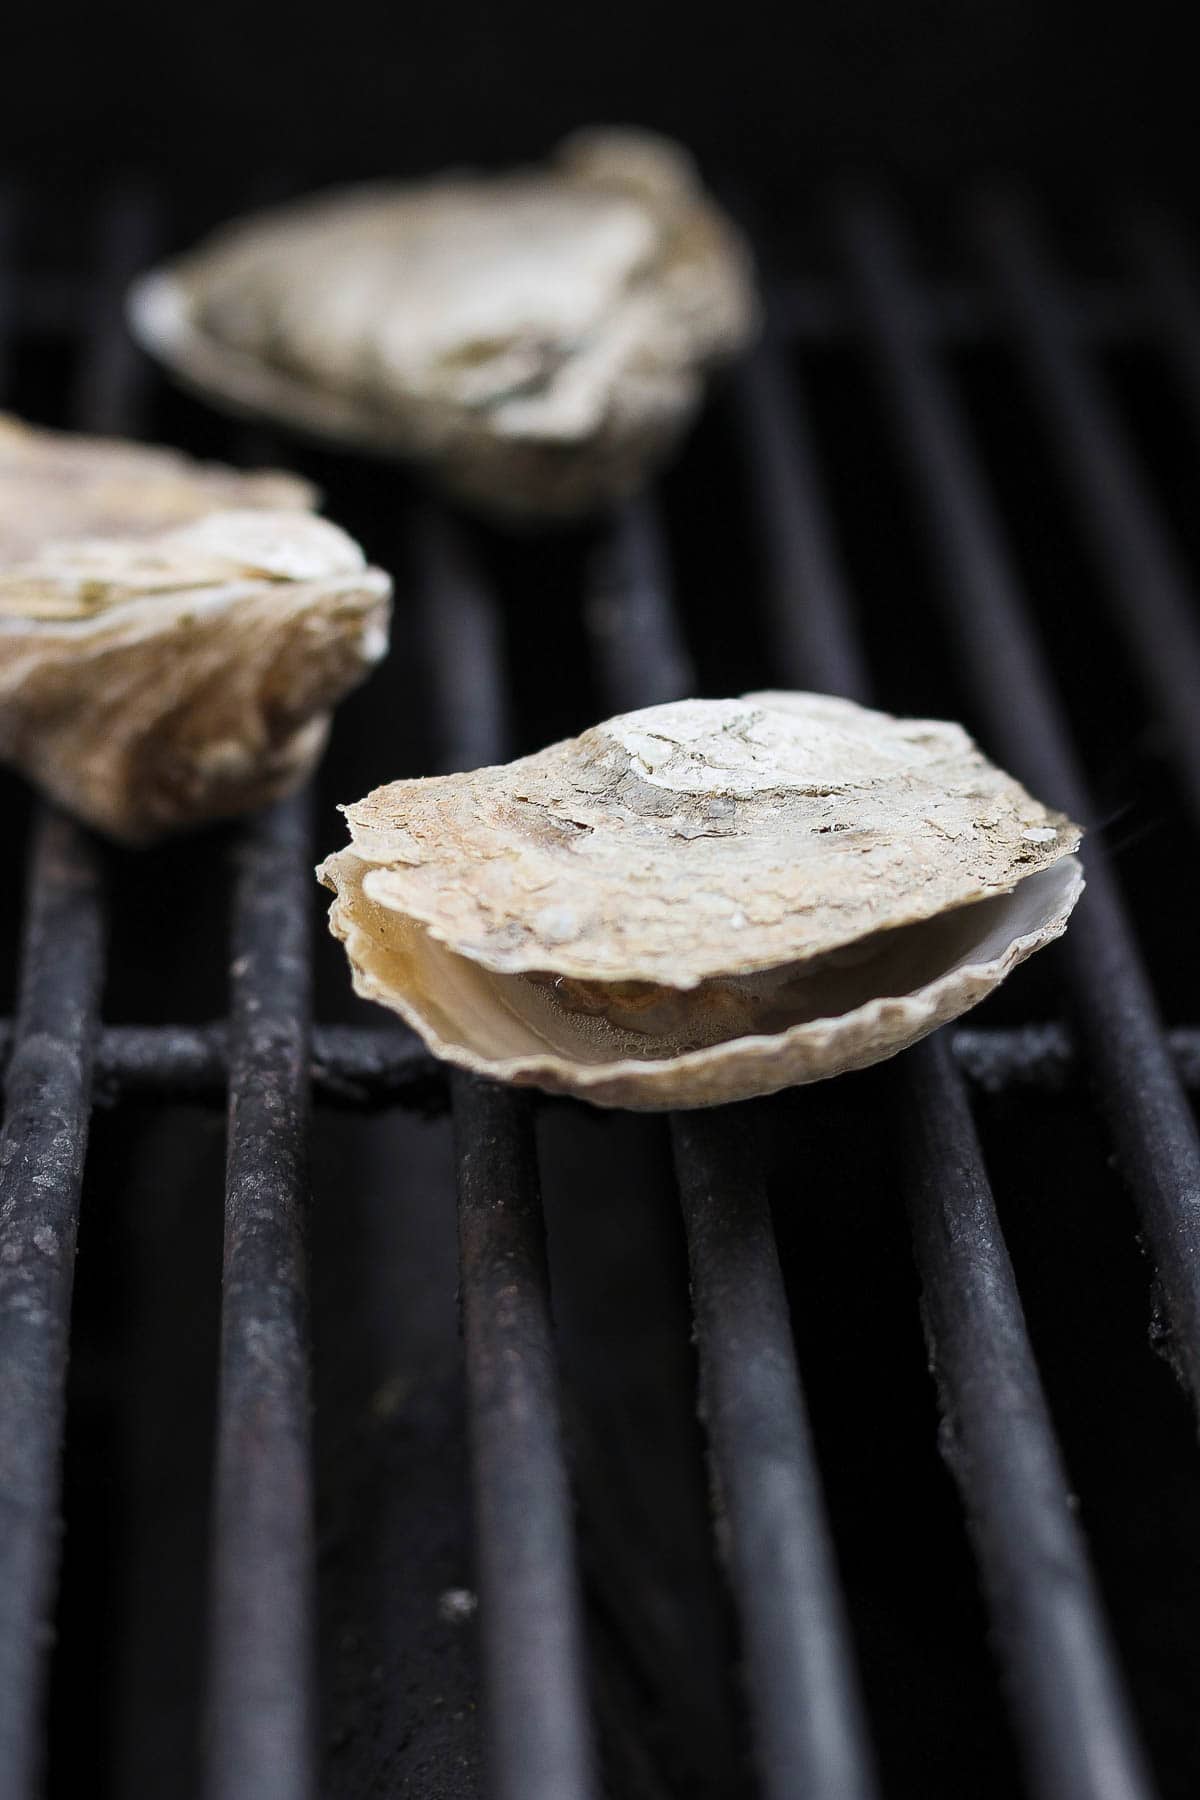 Oysters popped open on the grill.